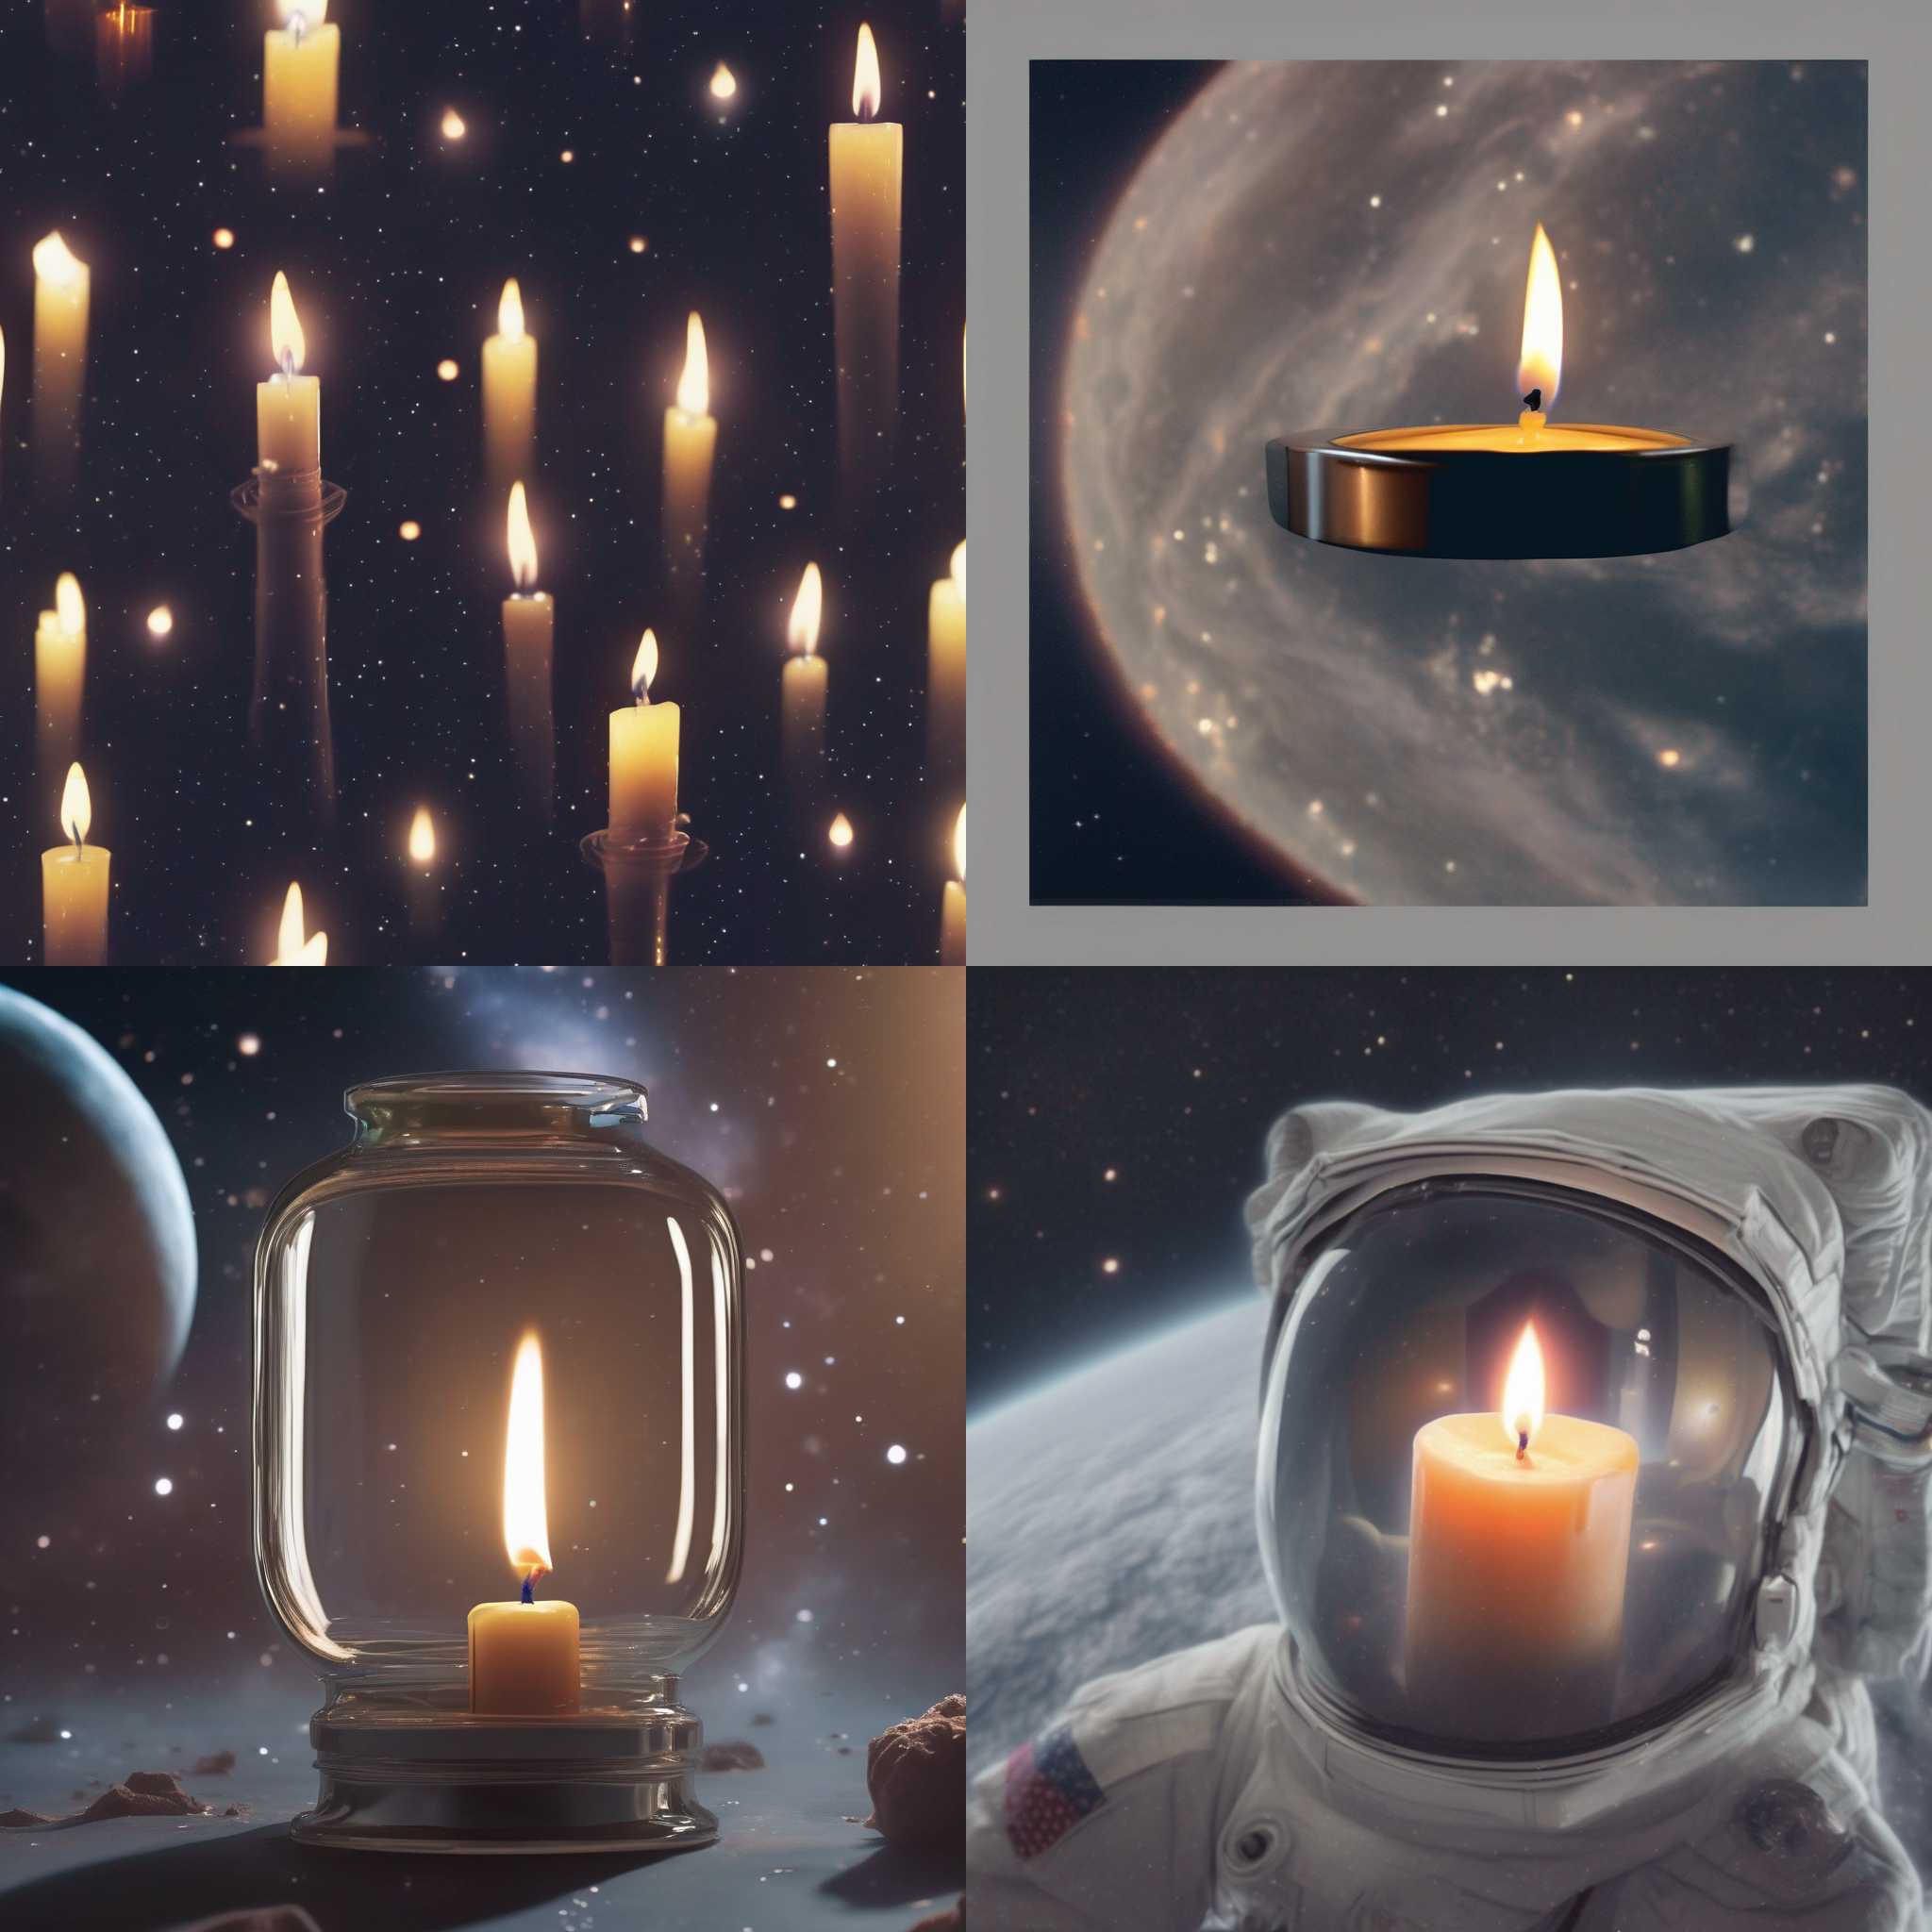 A candle in space